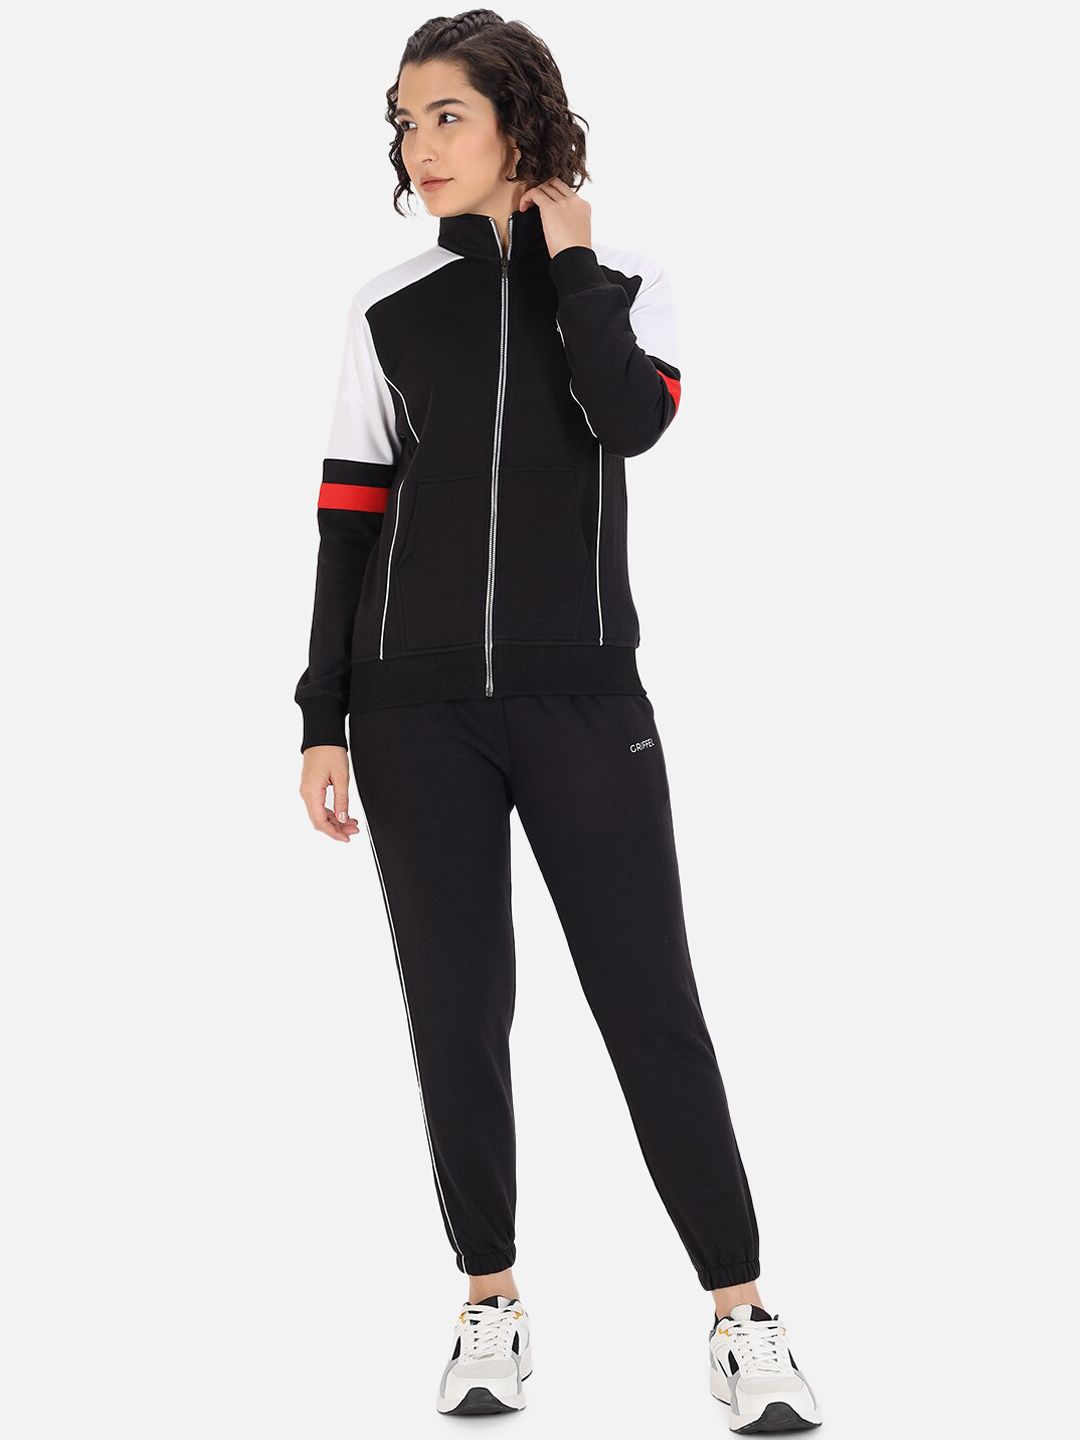 GRIFFEL Women Black & Red Colourblocked Cotton Tracksuit Price in India